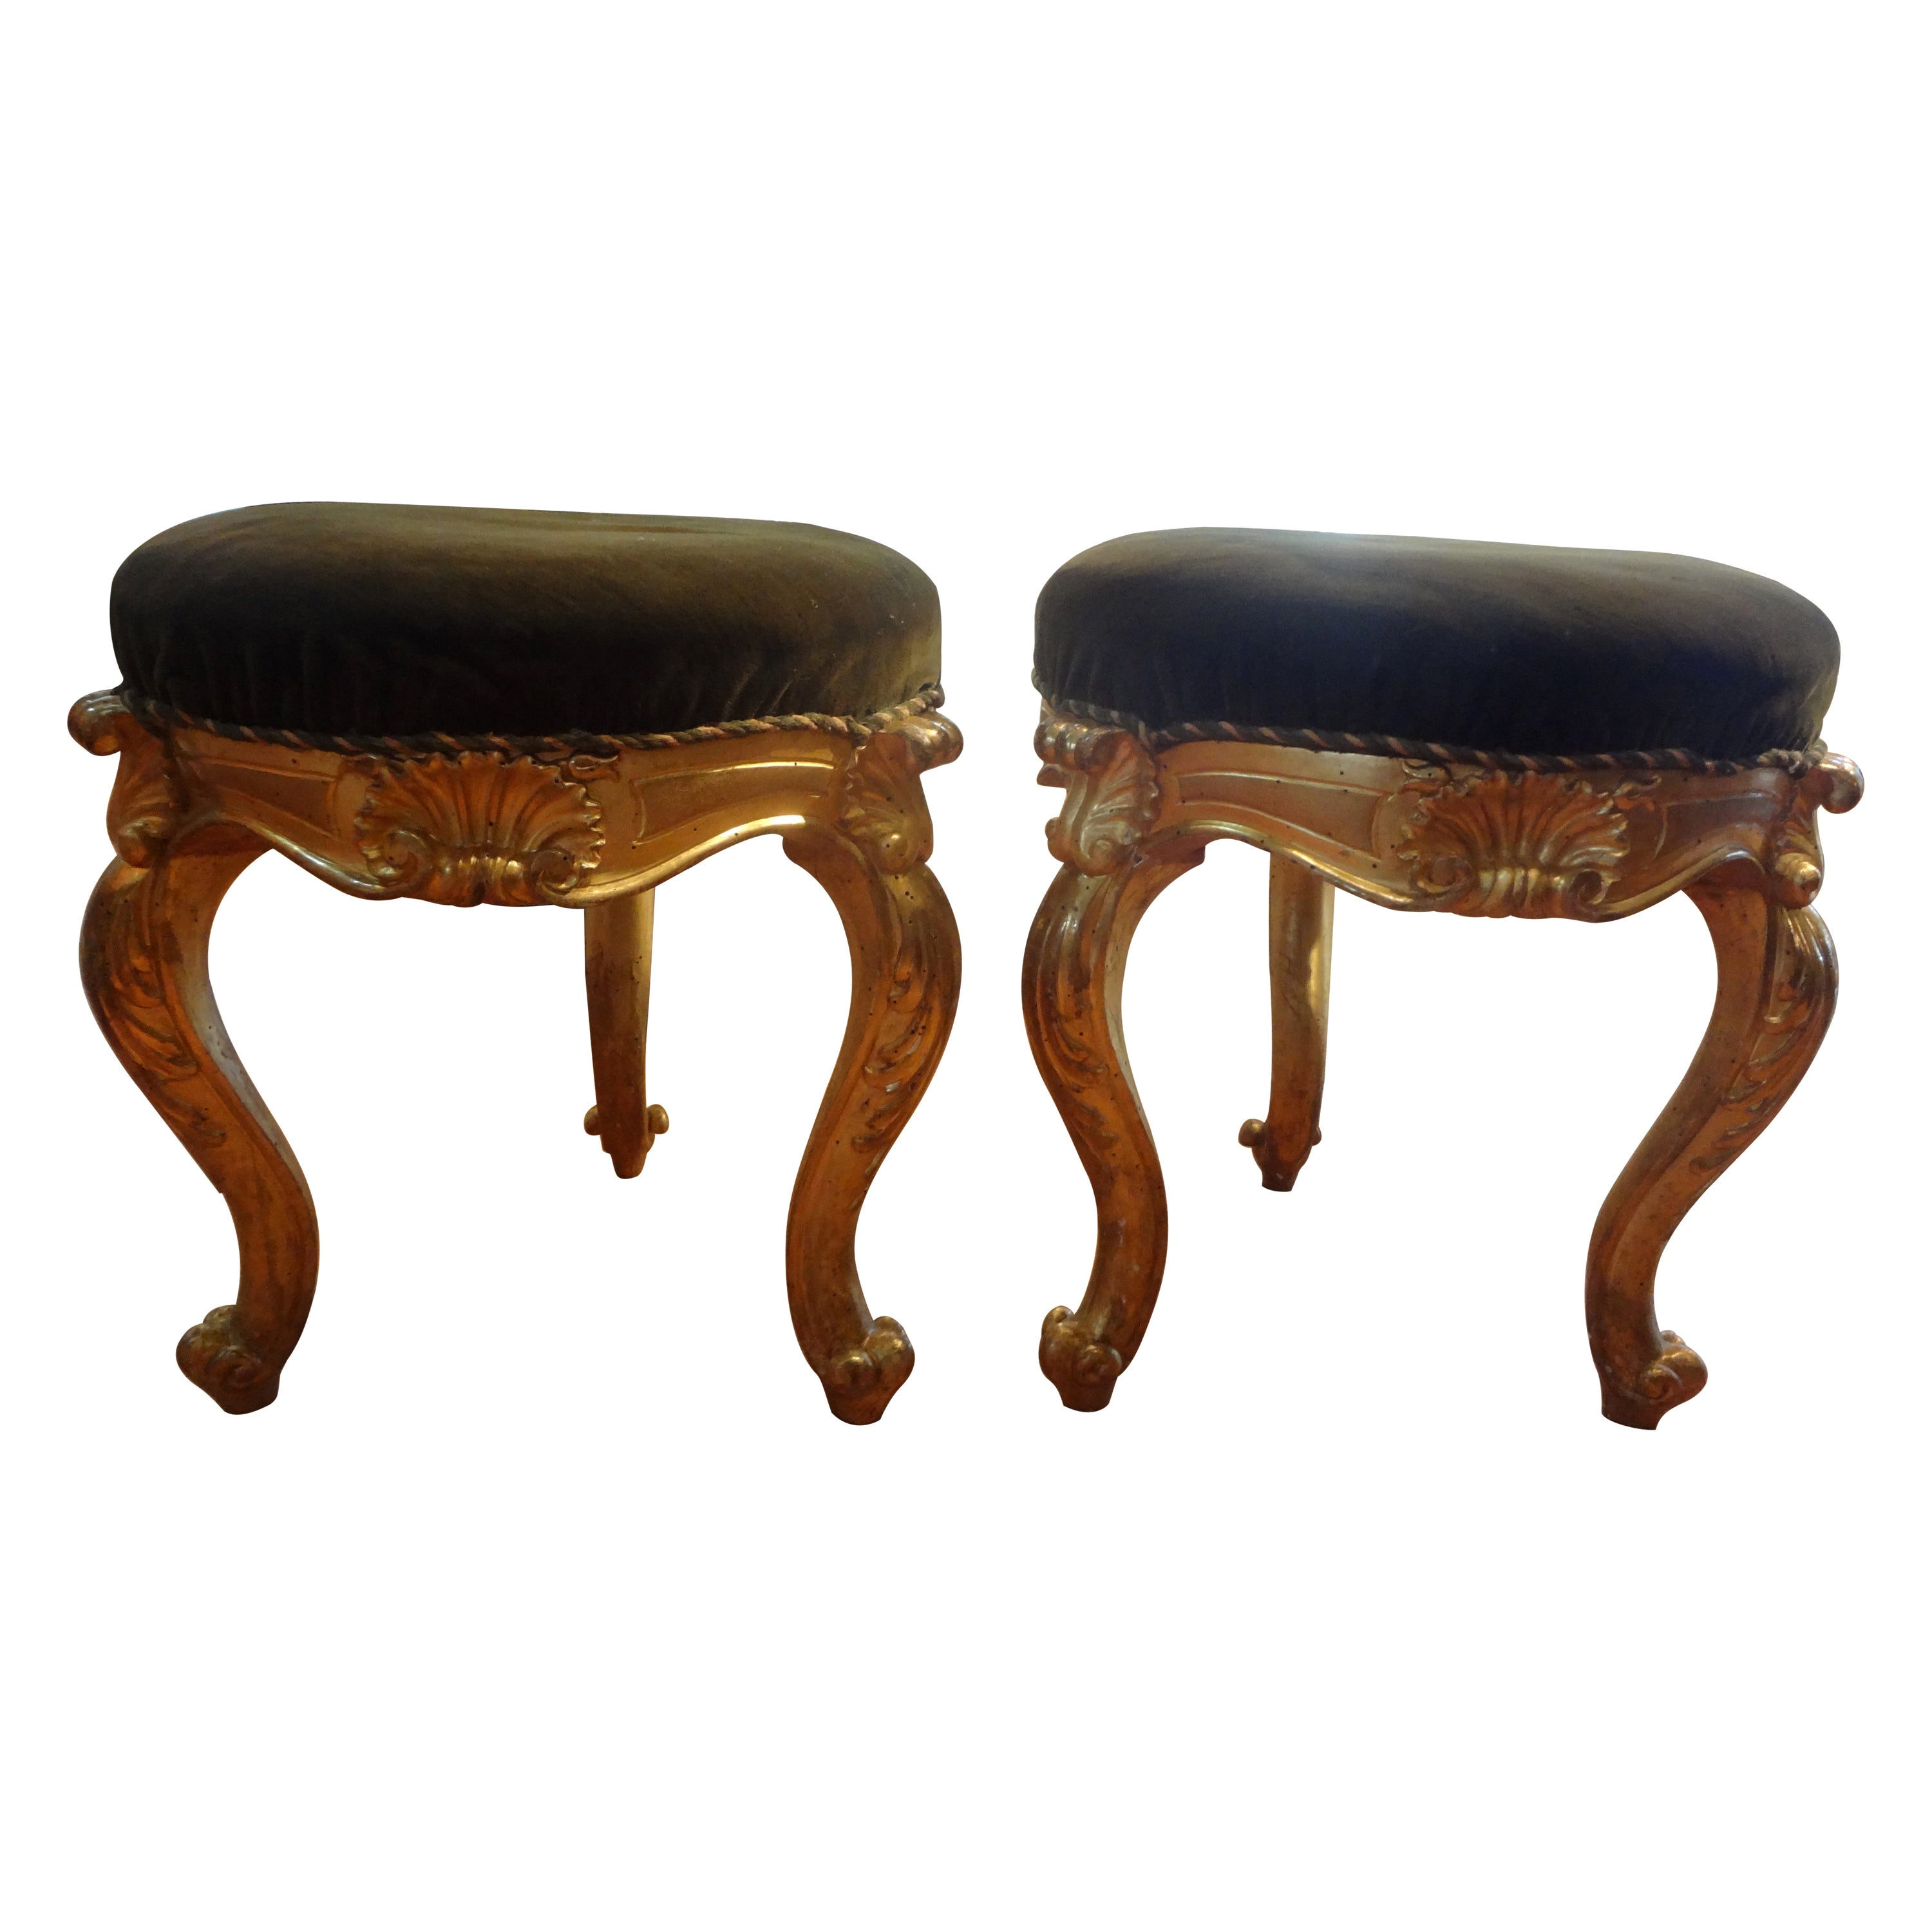 Pair of 19th Century Italian Regence Style Giltwood Ottomans For Sale